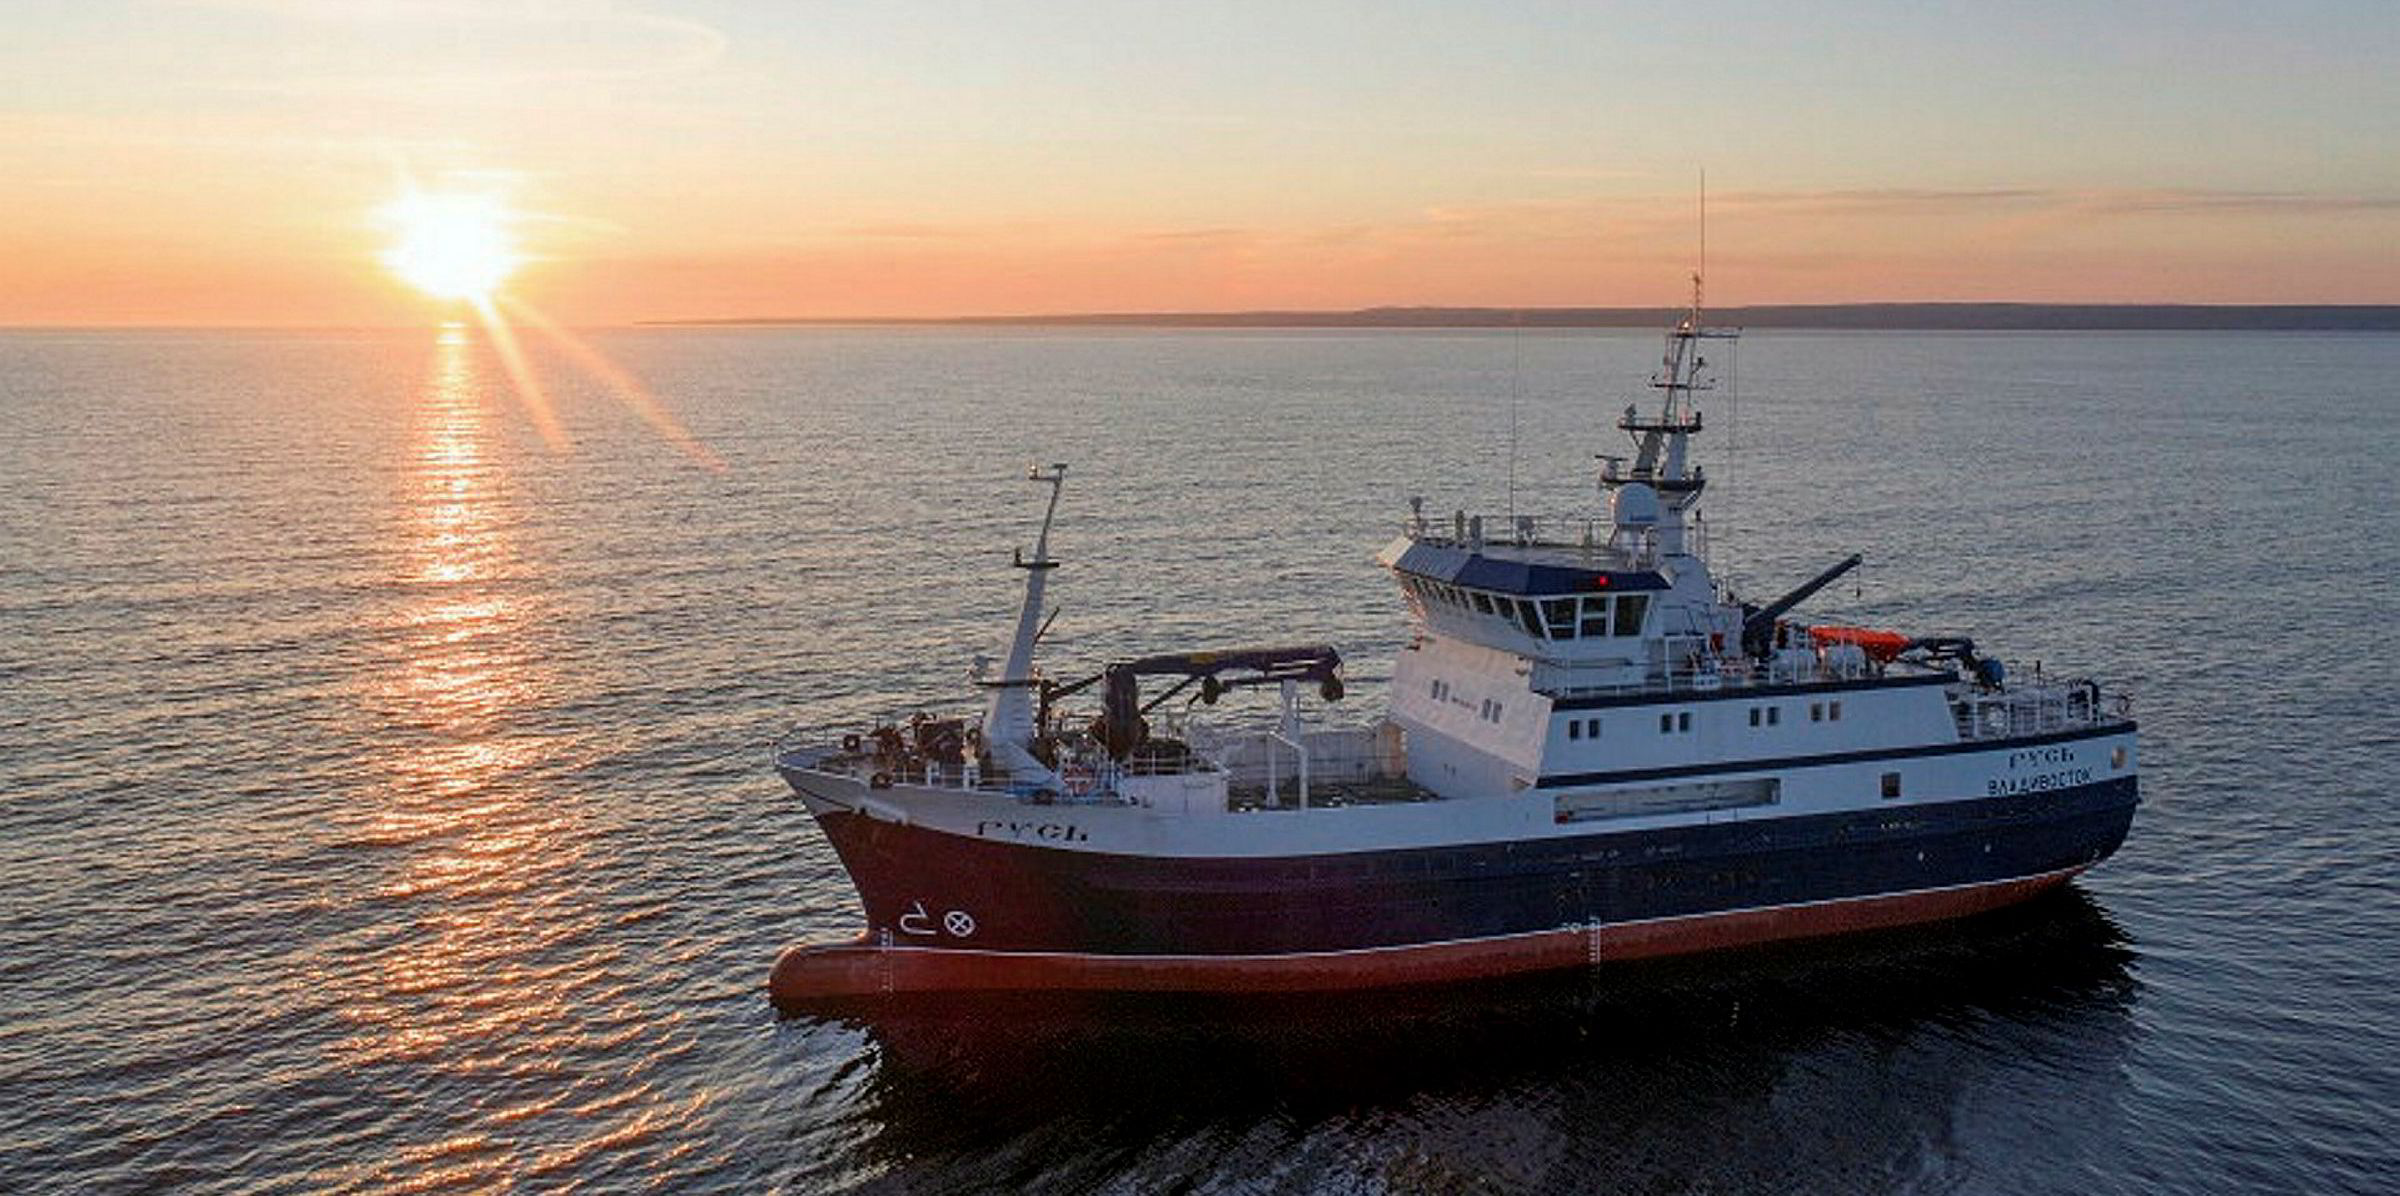 Russian fishing company SZRK takes delivery of 73-meter crab